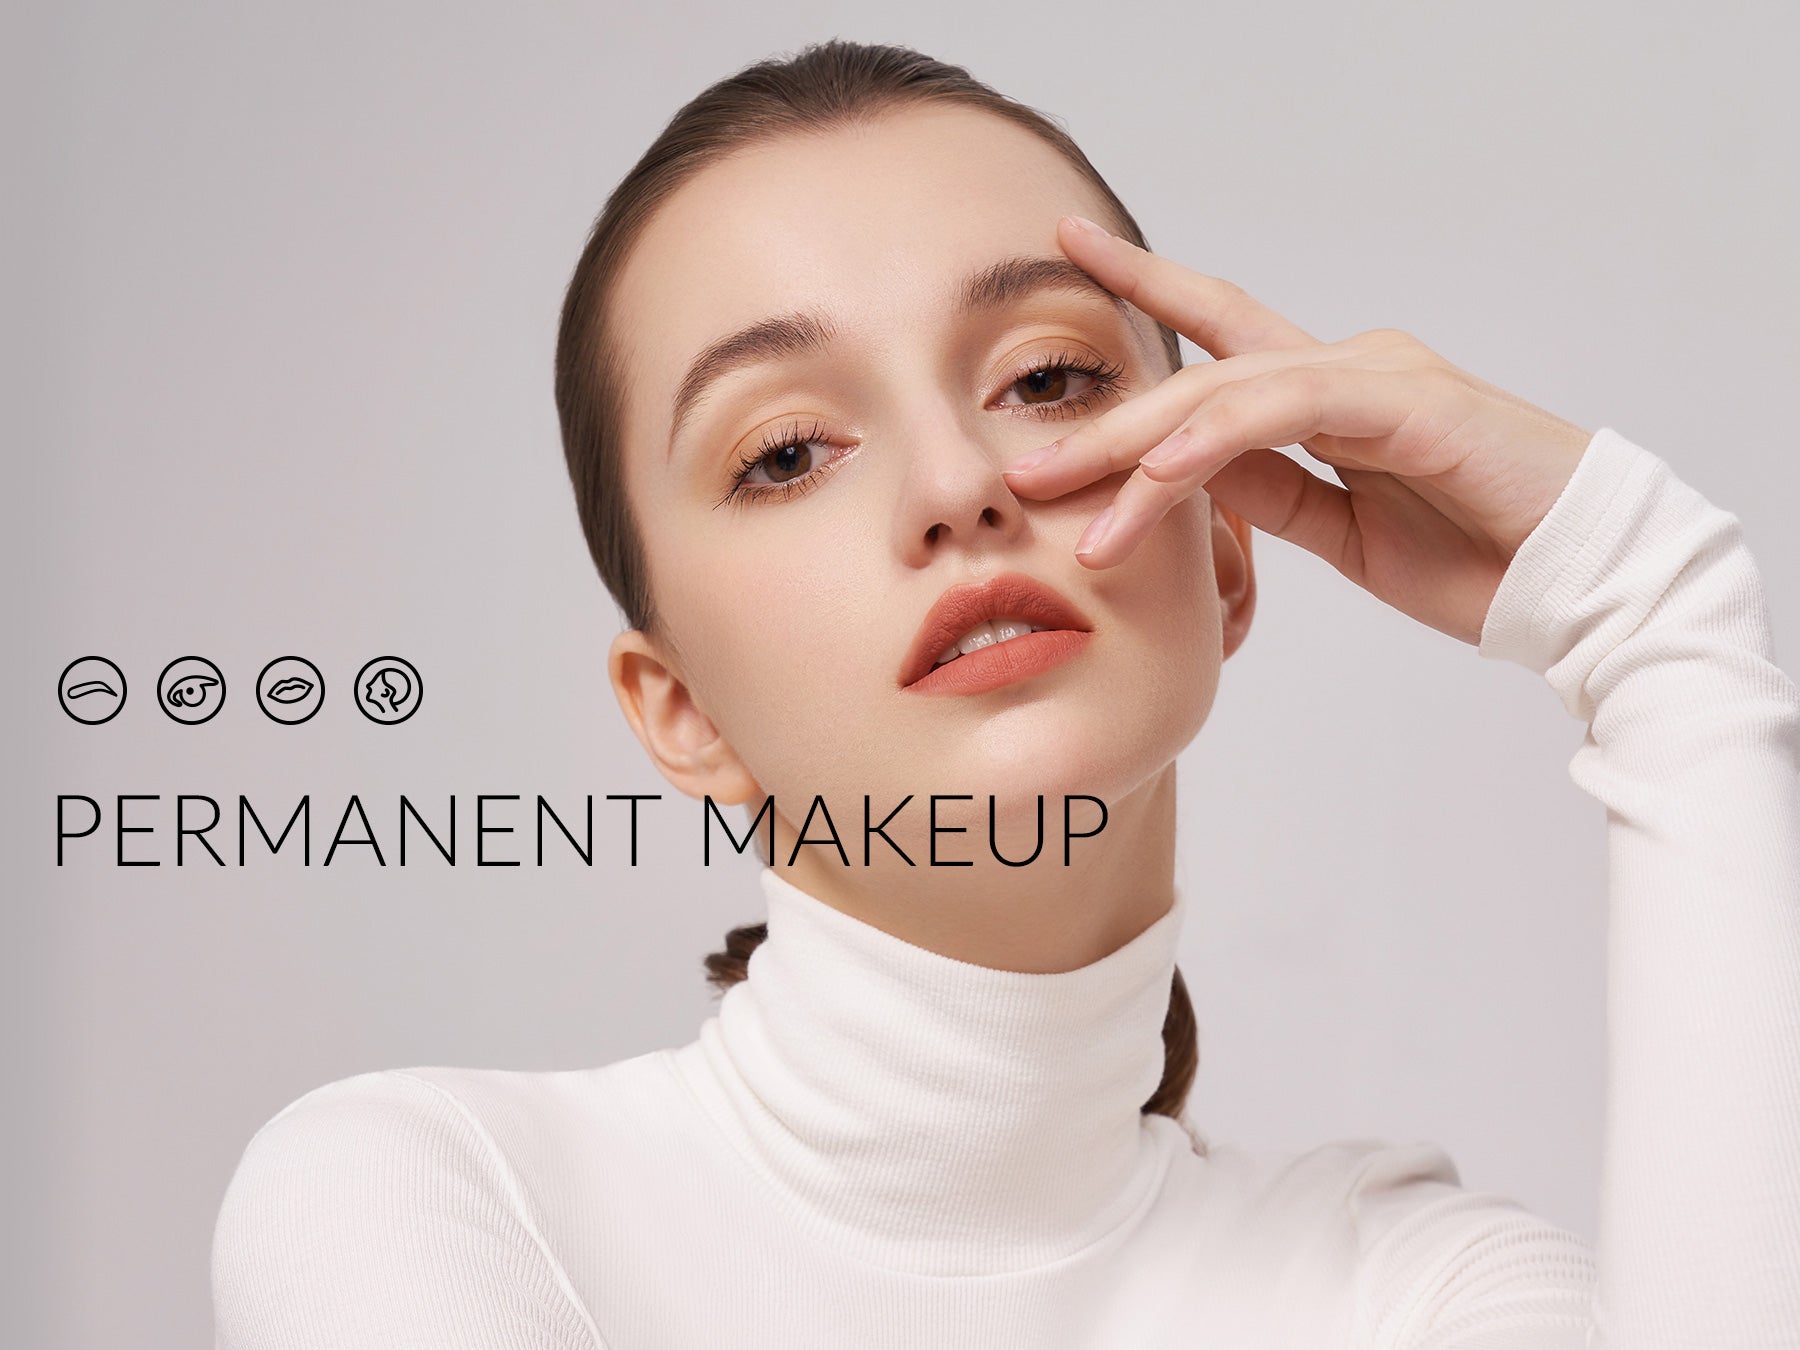 Is Permanent Makeup Good for Your Skin?